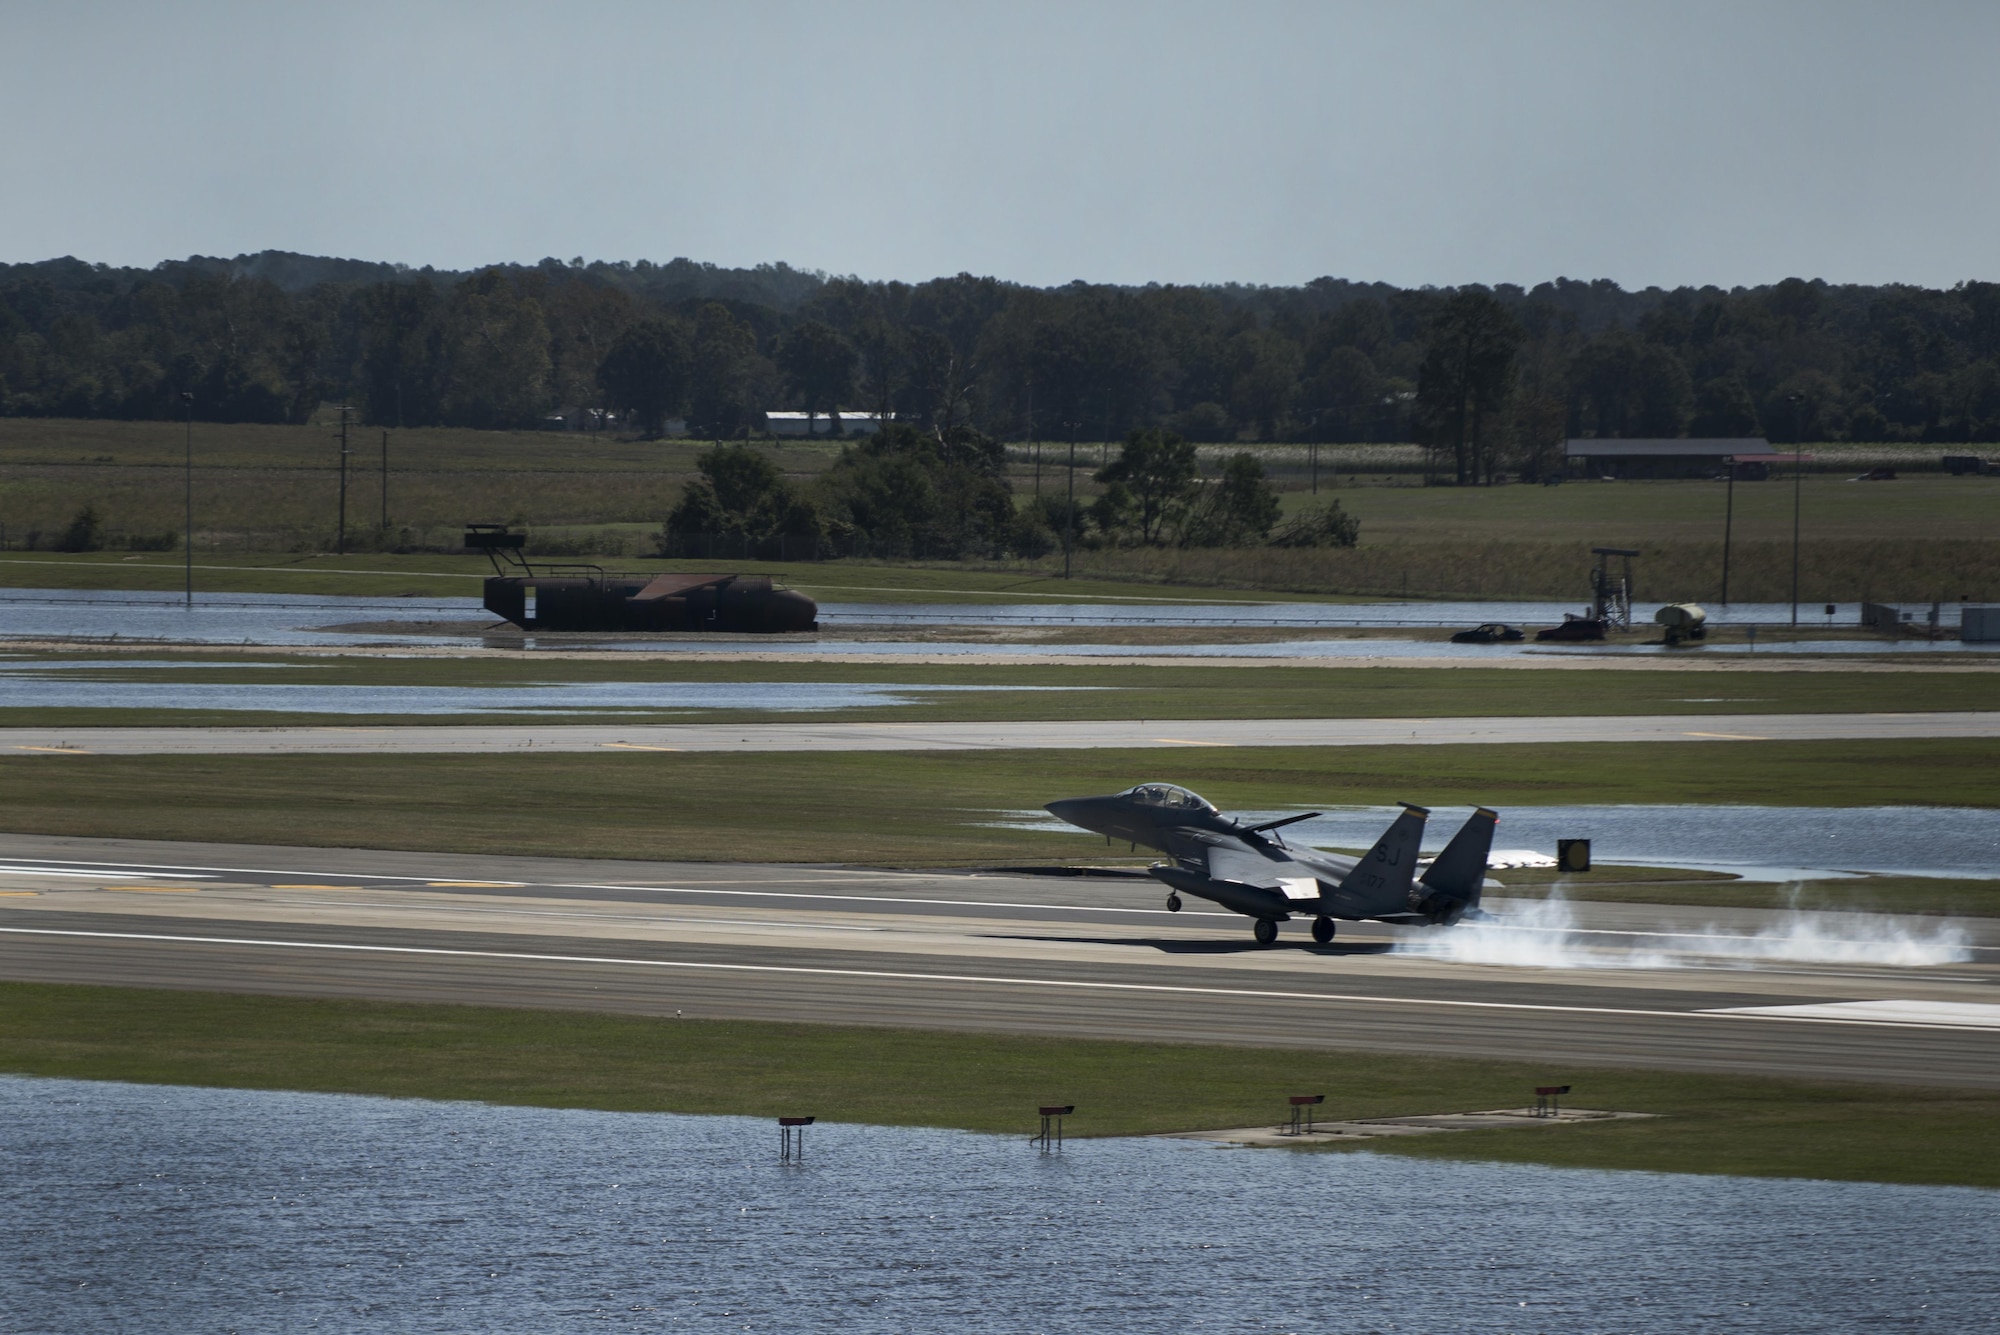 An F-15E Strike Eagle from the 336th Fighter Squadron lands on the runway, Oct. 11, 2016, at Seymour Johnson Air Force Base, North Carolina. More than 40 Strike Eagles were repositioned to Barksdale Air Force Base, Louisiana, ahead of Hurricane Matthew to avoid potential damage from severe weather associated with the storm. (U.S. Air Force photo by Senior Airman Brittain Crolley)